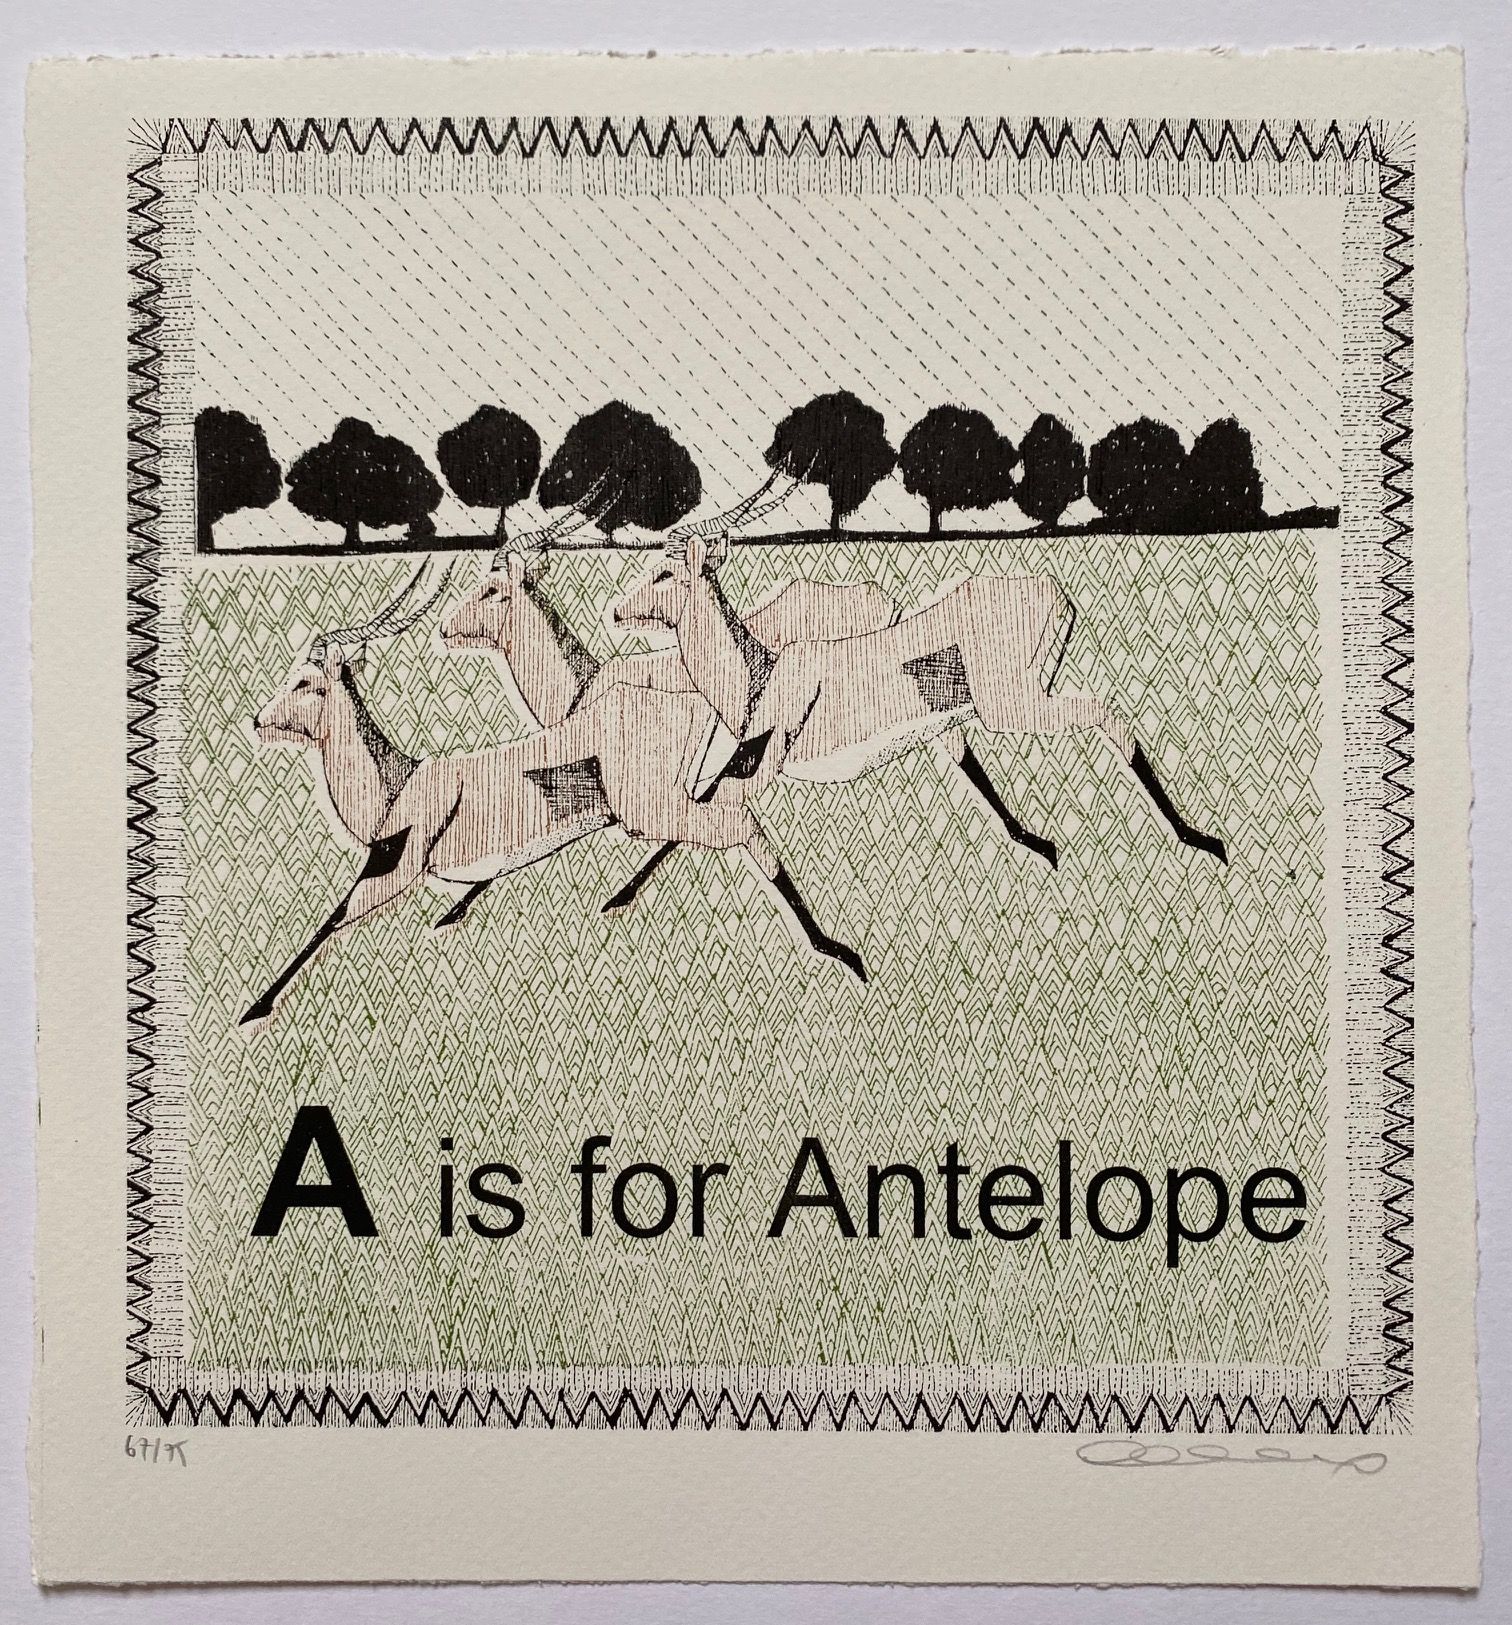 A is for Antelope (small) by Clare Halifax